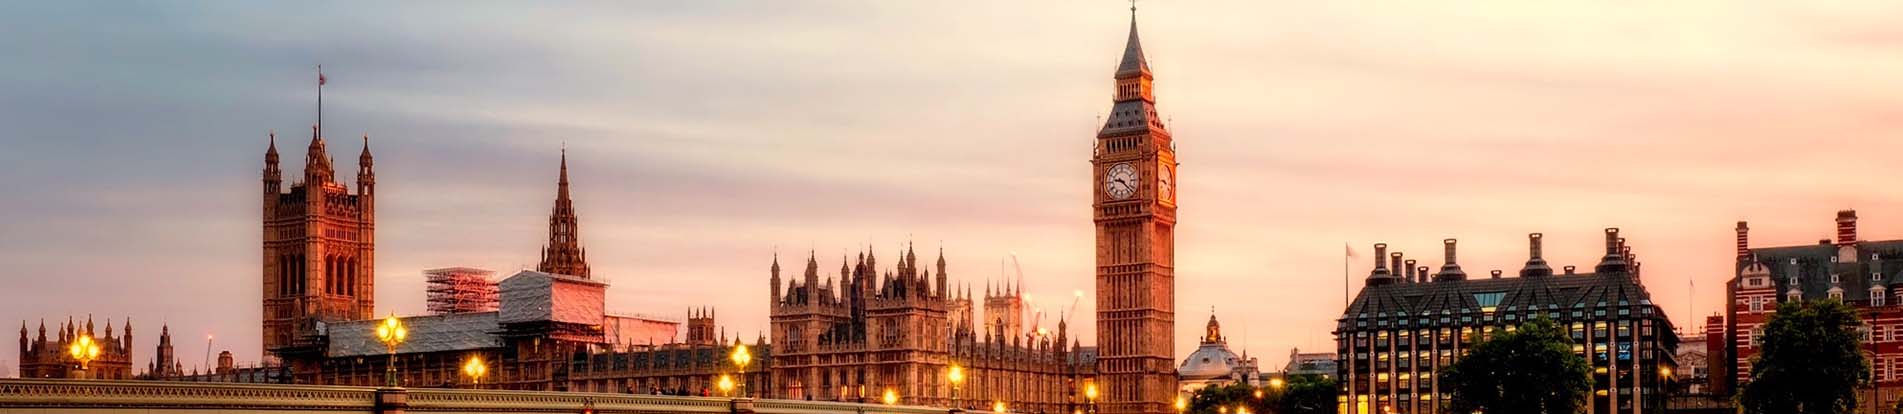 Top 16 Attractions in London